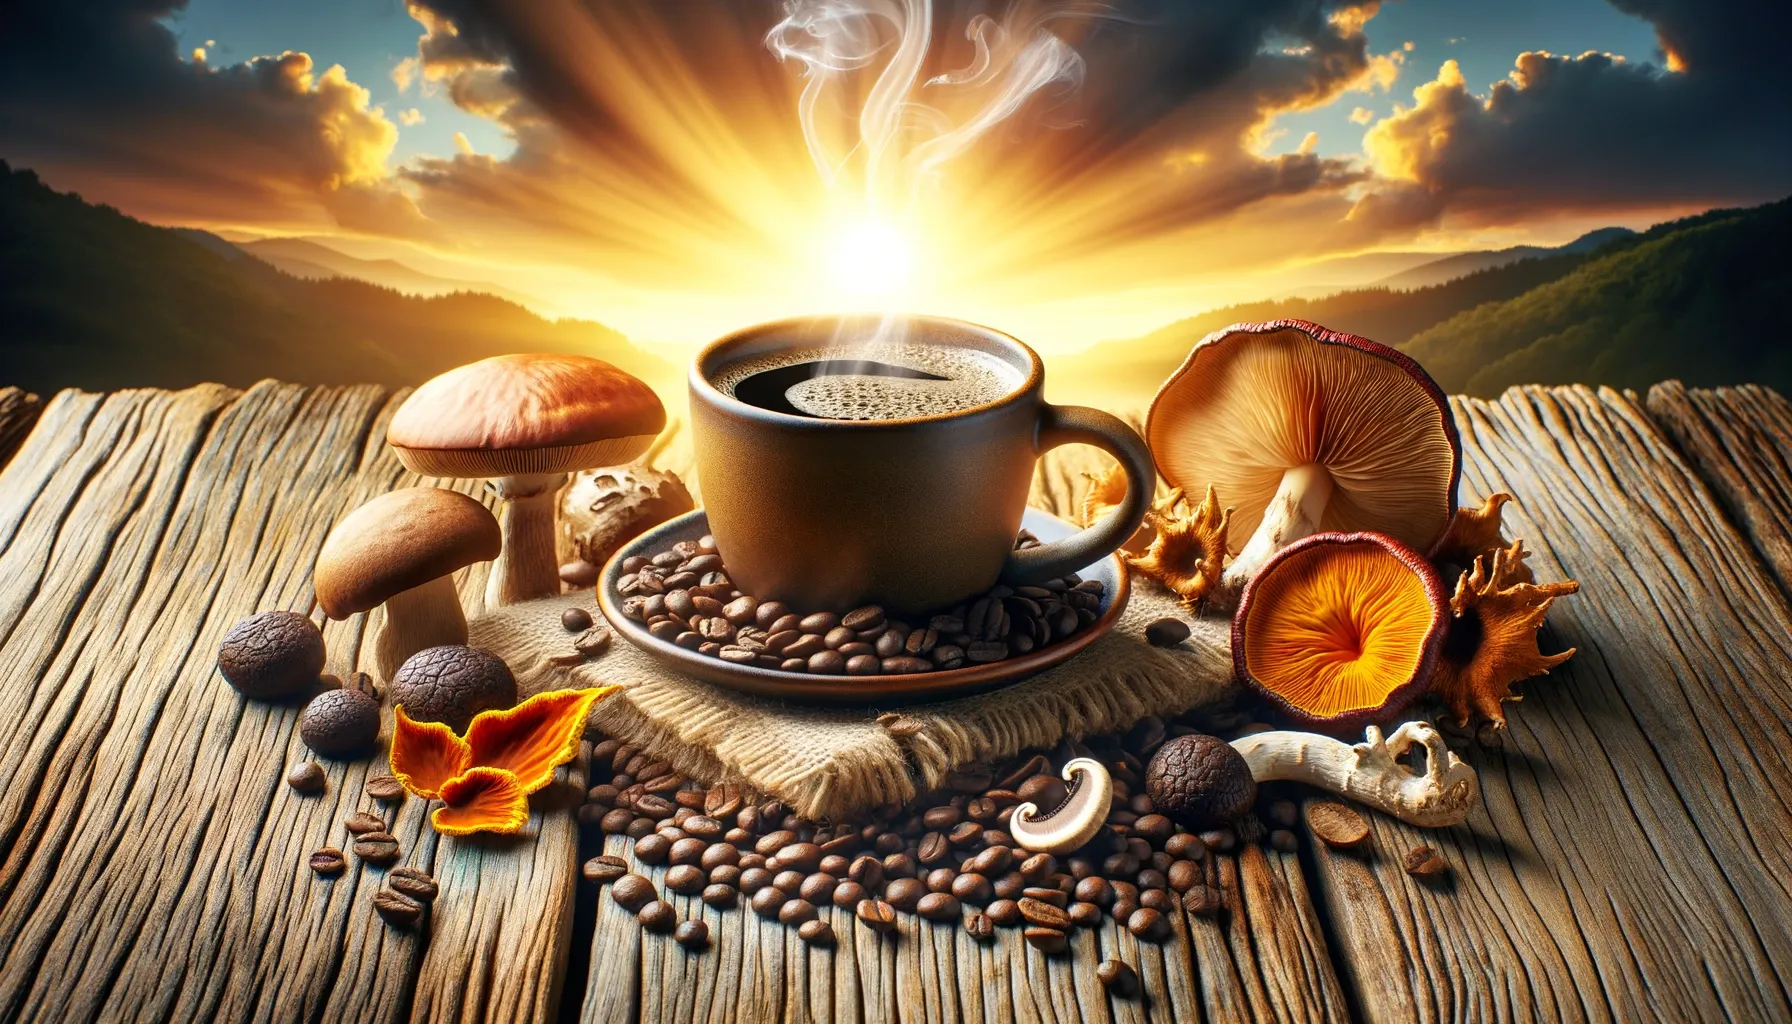 Steaming mug of mushroom coffee on a rustic table with medicinal mushrooms and coffee beans during sunrise.